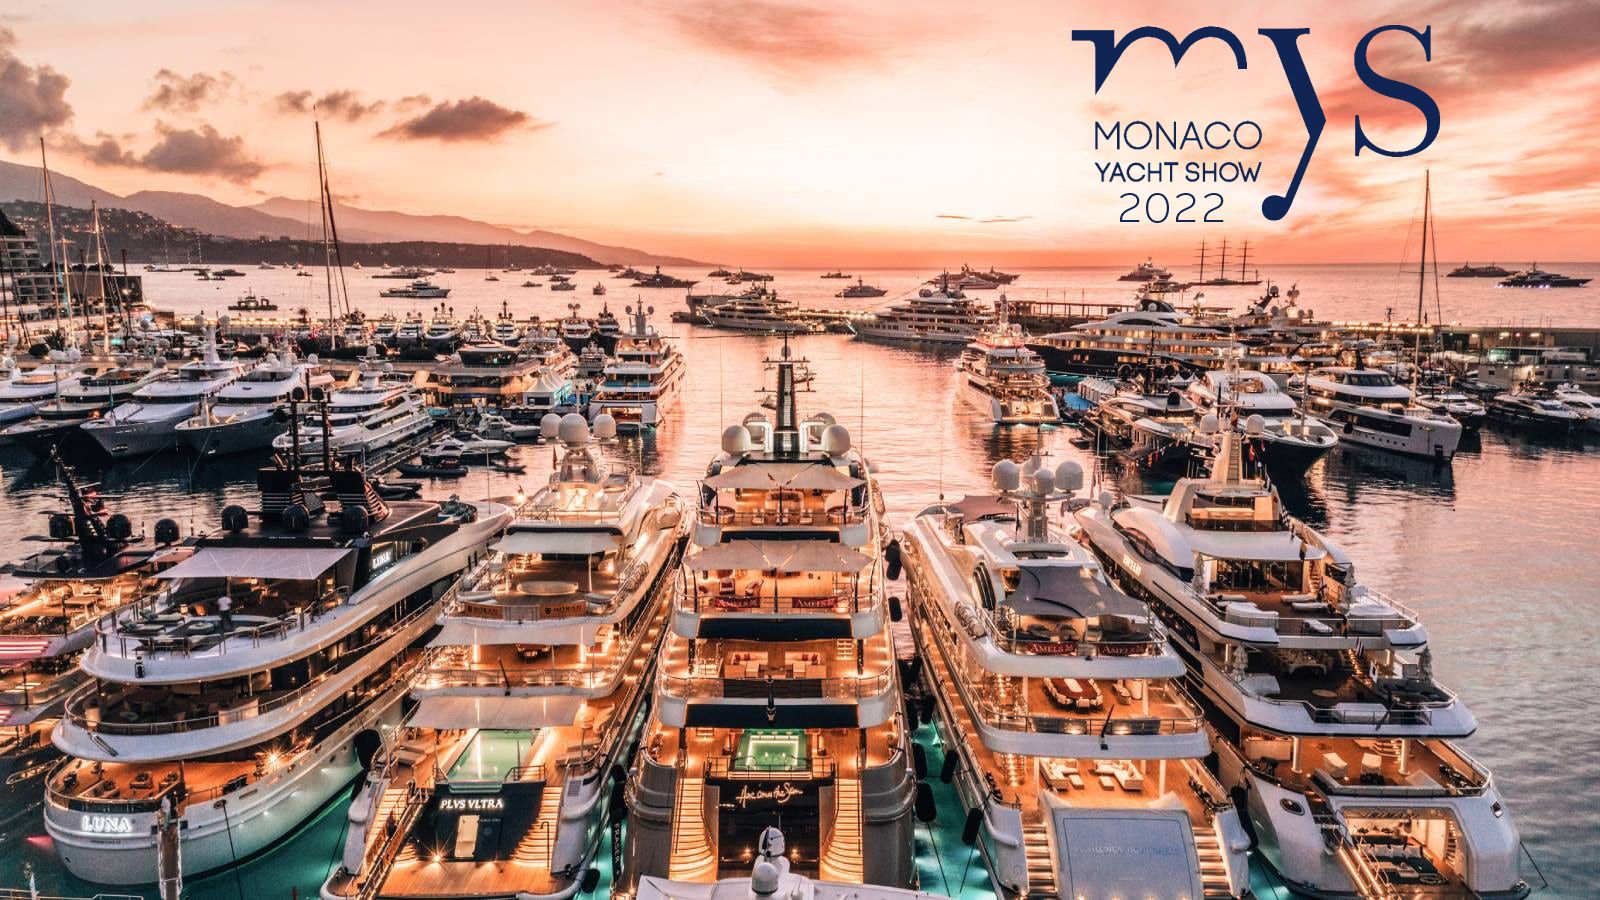 IYC at the 2022 Monaco Yacht Show